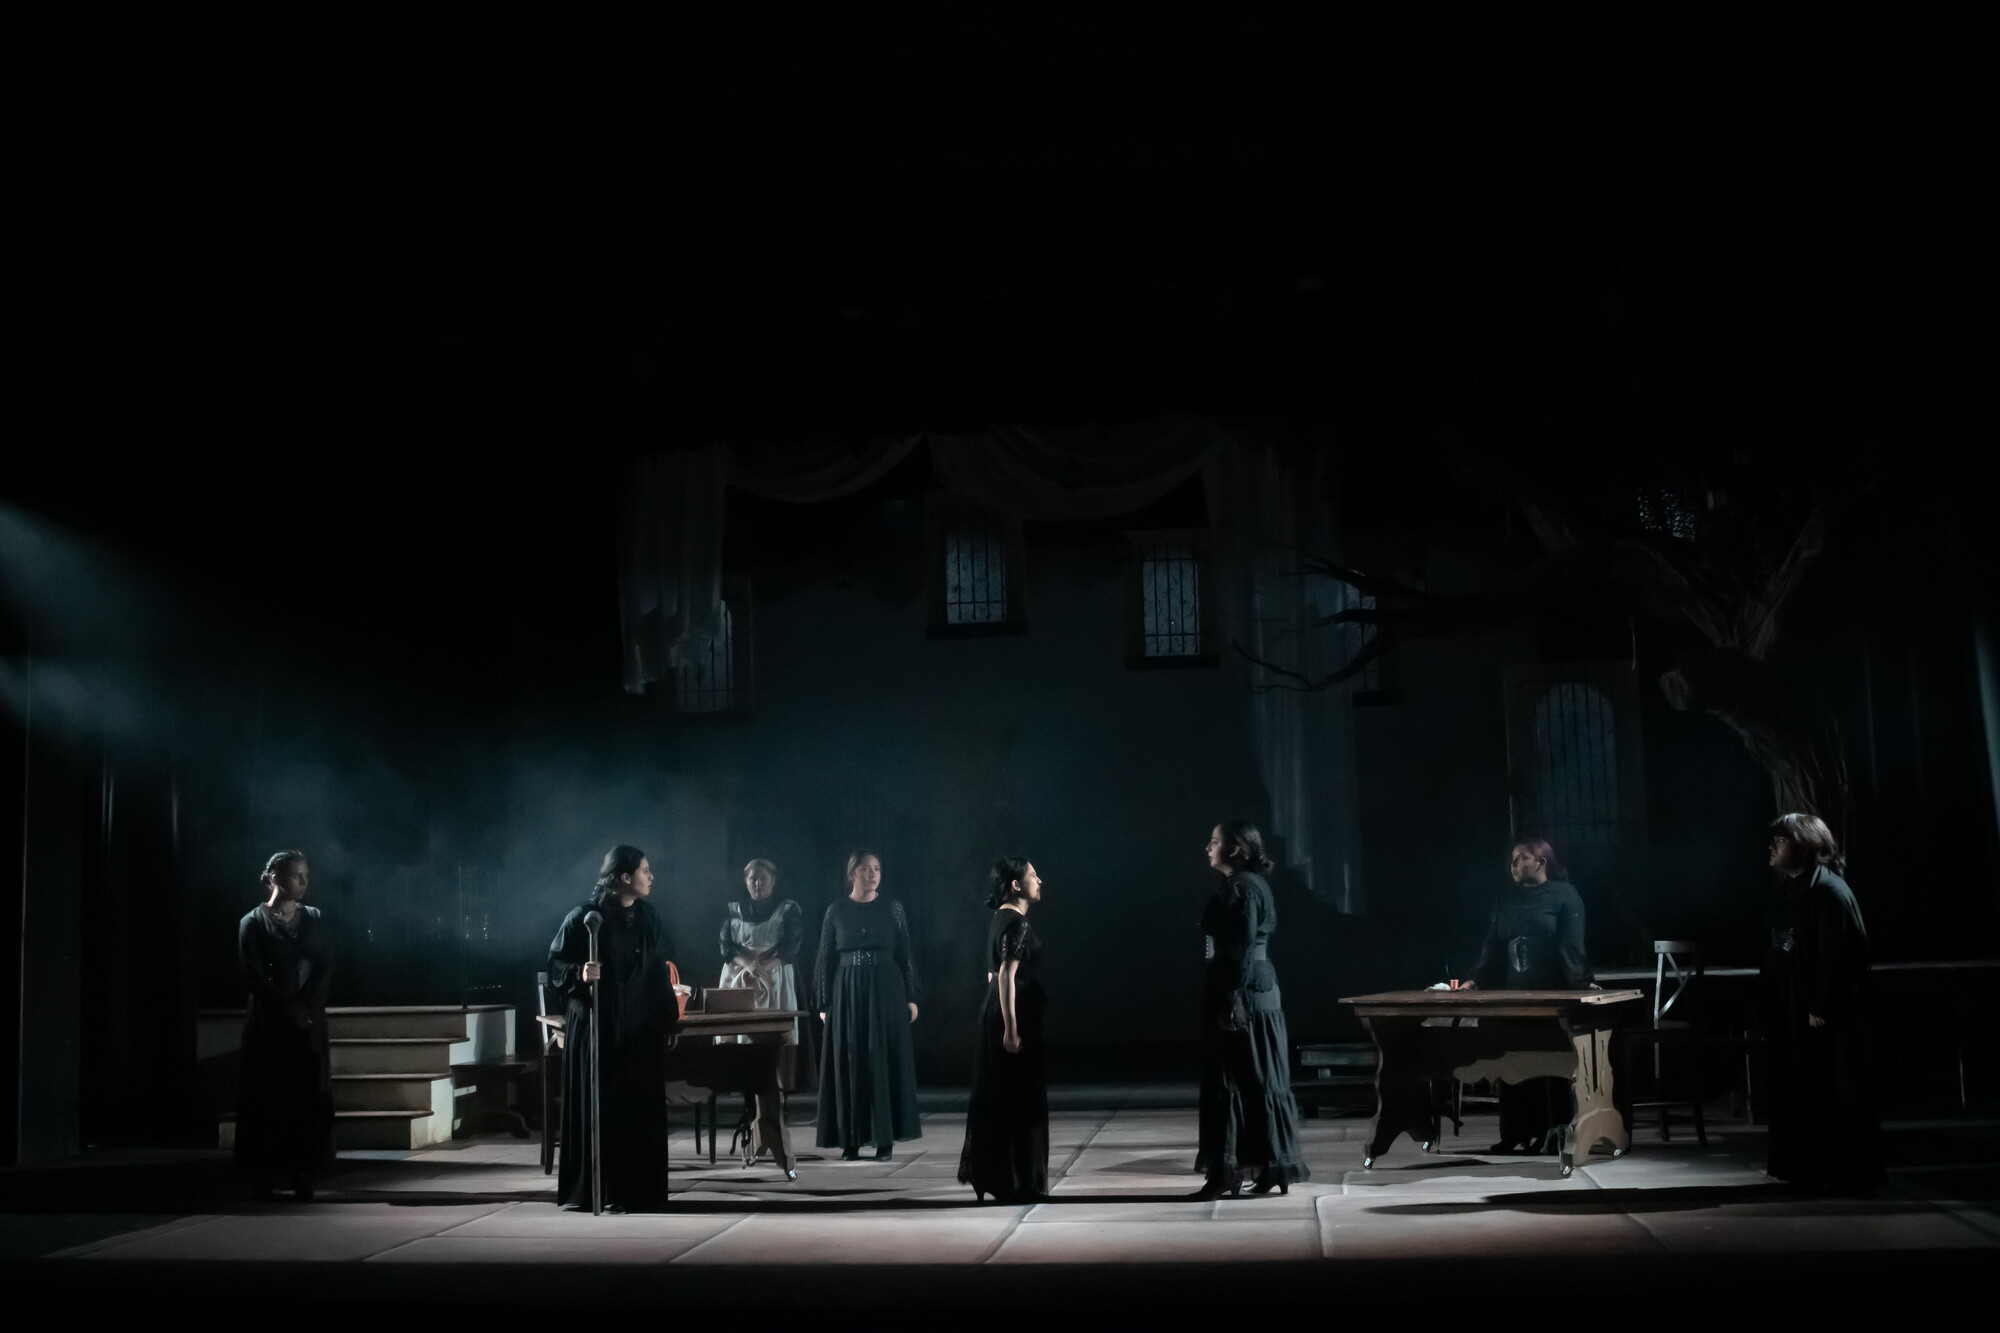 A group of dimly lit figures wearing black onstage.